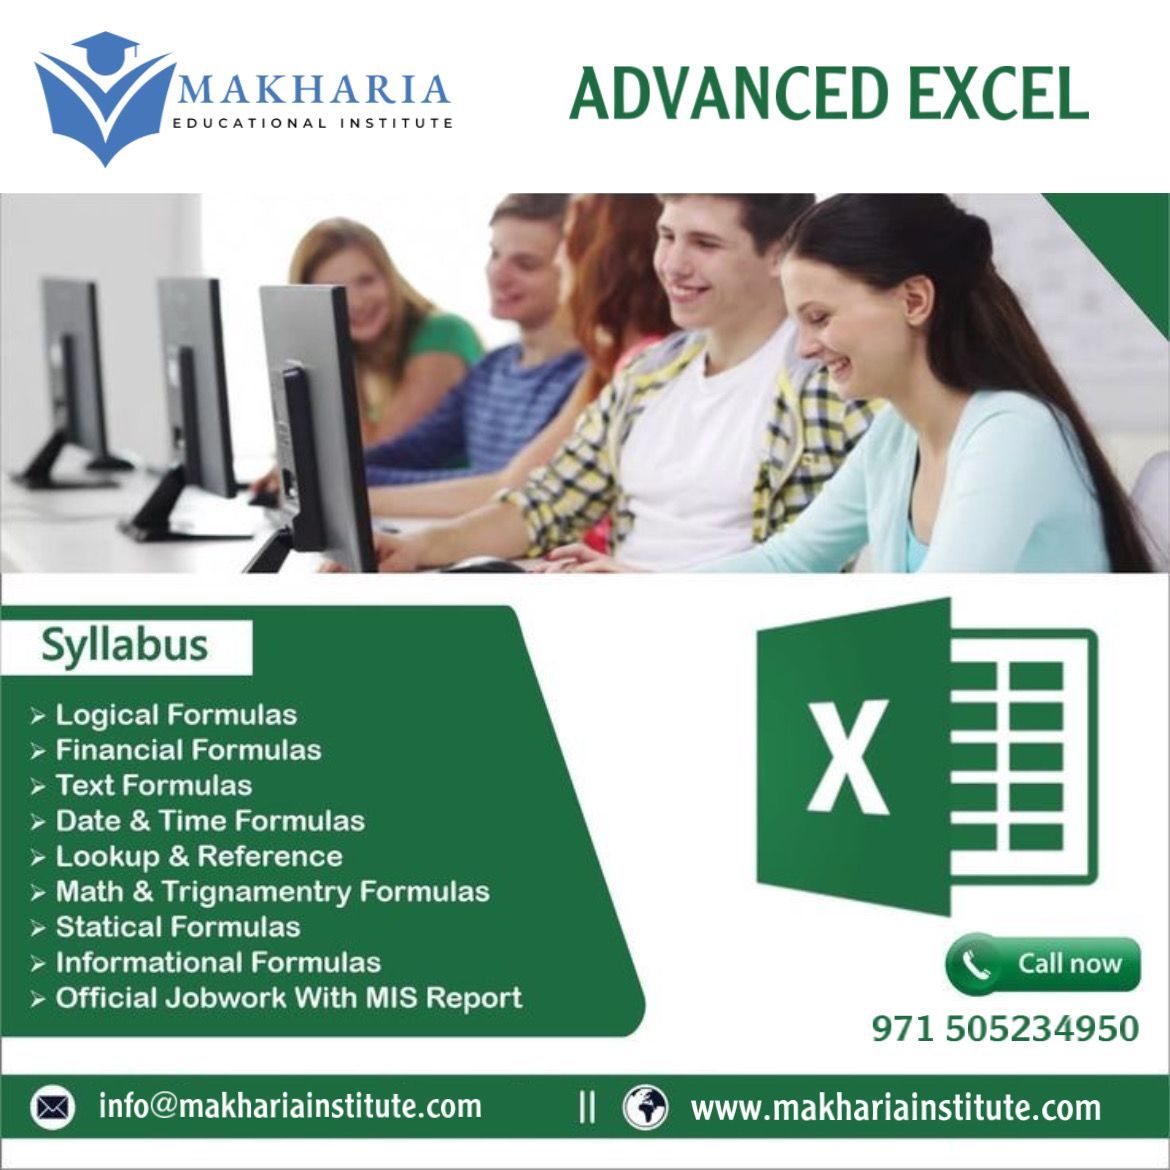 Get the Advanced Excel course at MAKHARIA call -0568723609